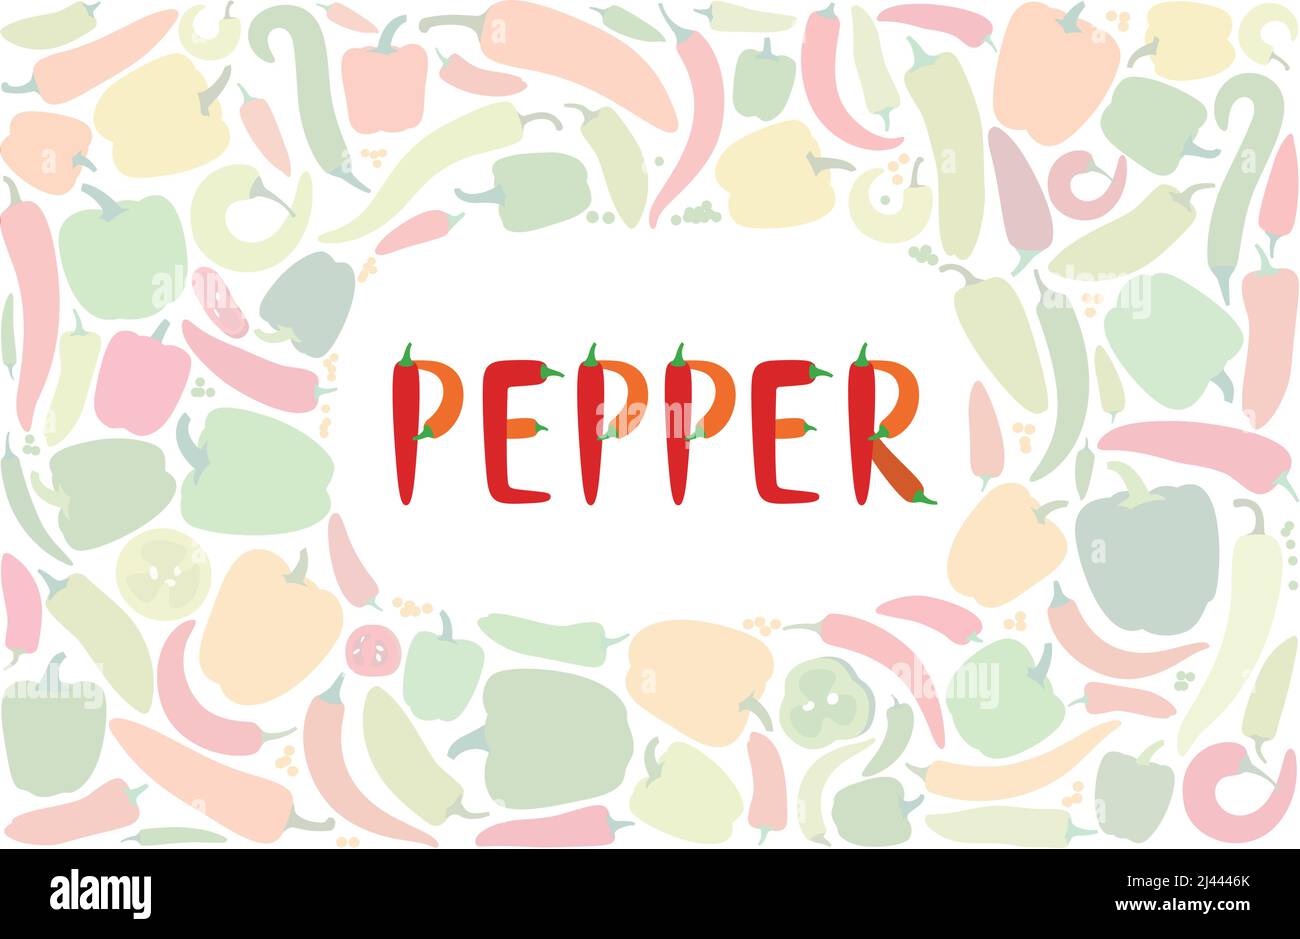 Alphabet Hot pepper font, vector illustration. Chili peppers shape letters. Colorful peppers on white background Stock Vector